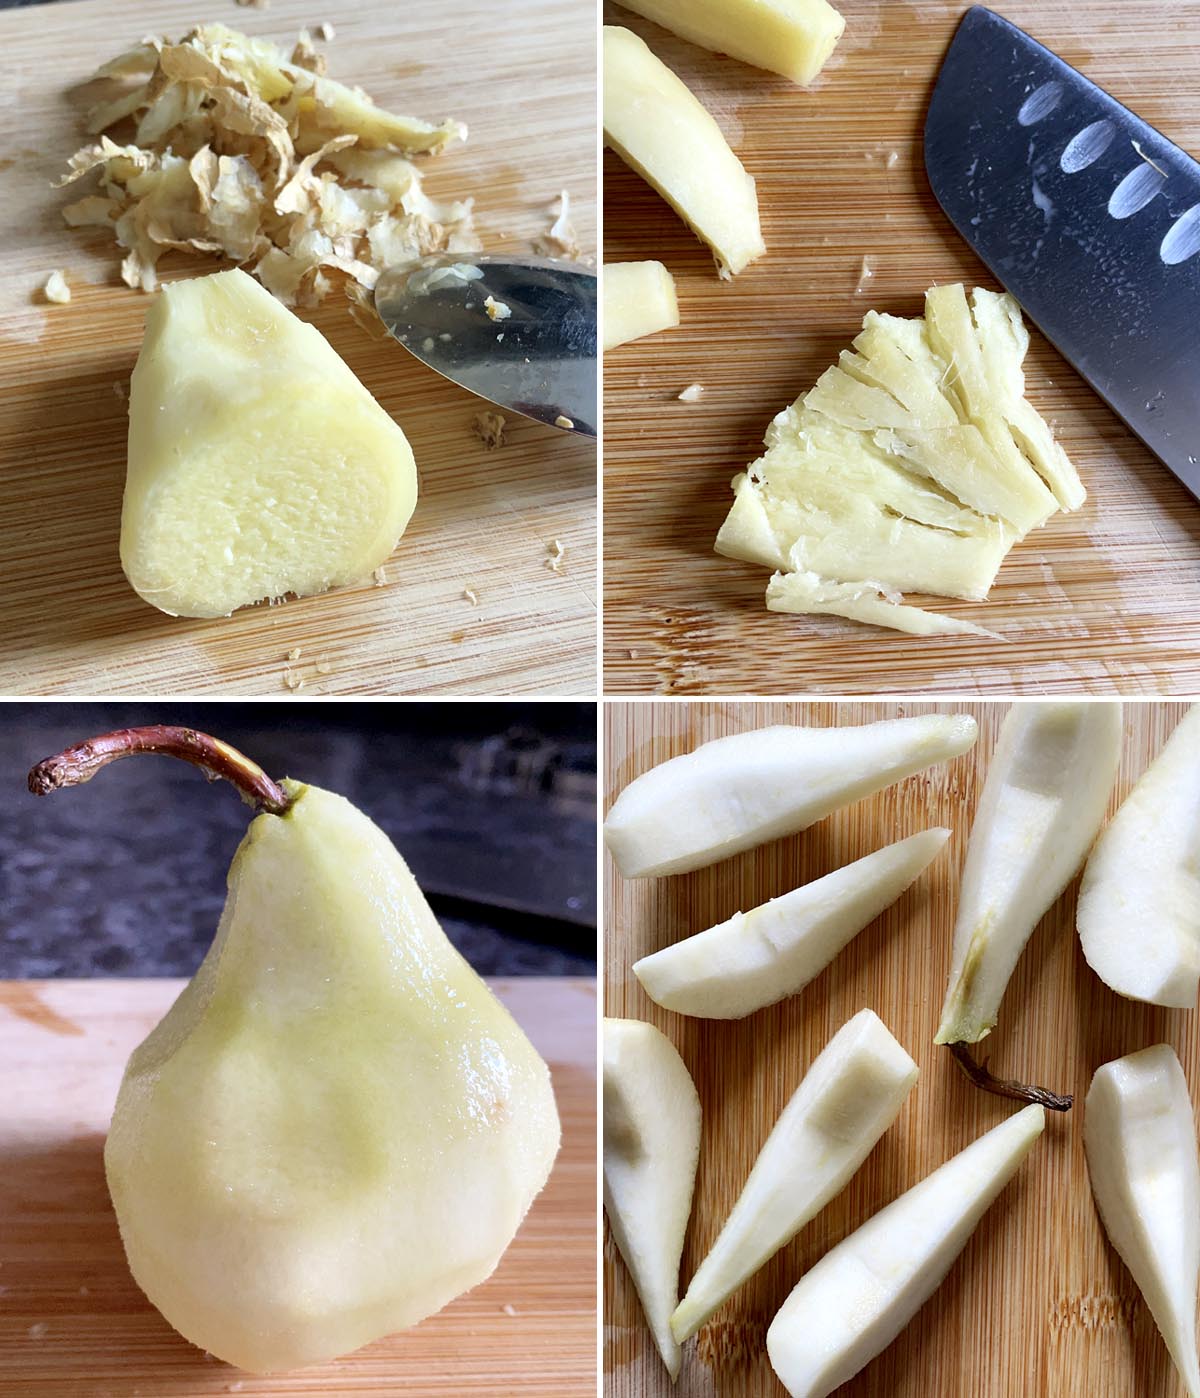 Peeled and crushed raw ginger, a peeled pear cut into 8 wedges.